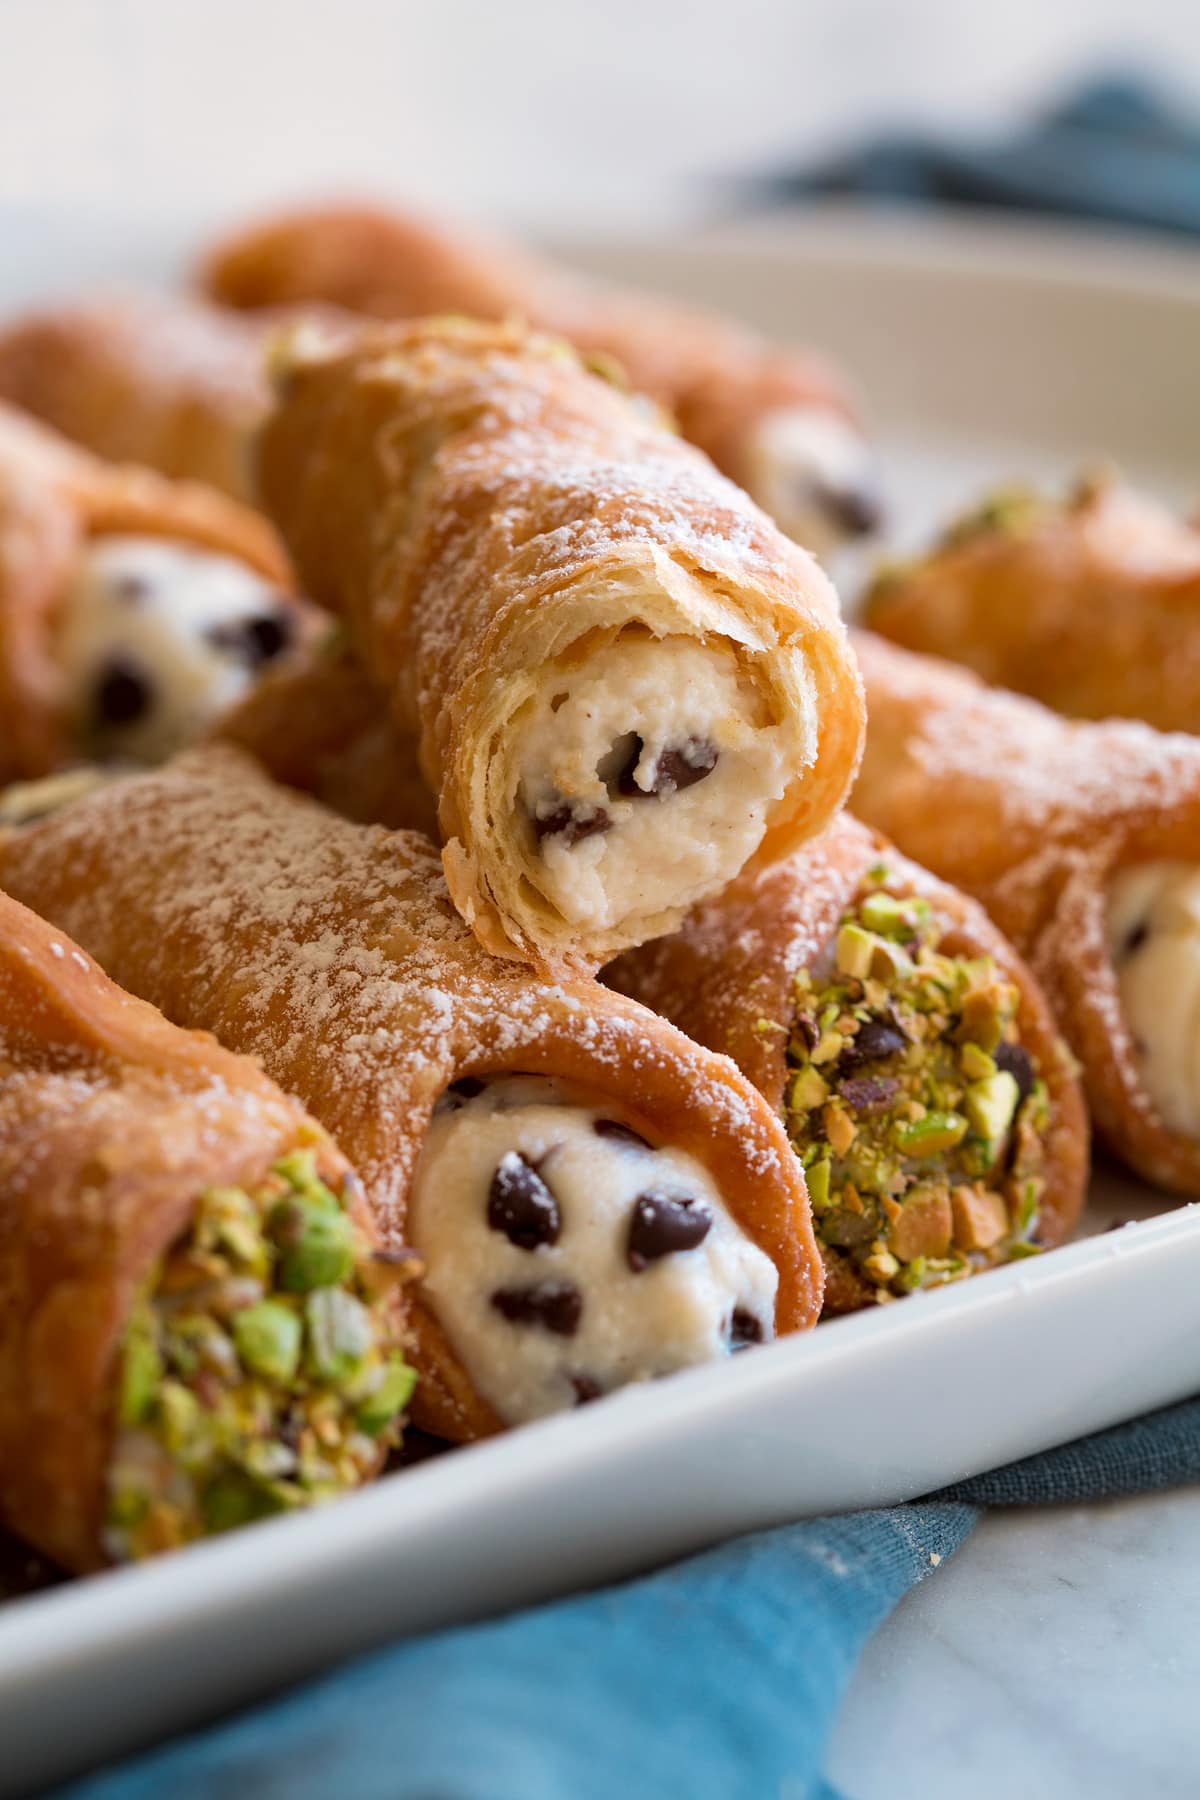 Cannoli bitten into to show flaky layers and crispy texture along with ricotta and chocolate chip filling.